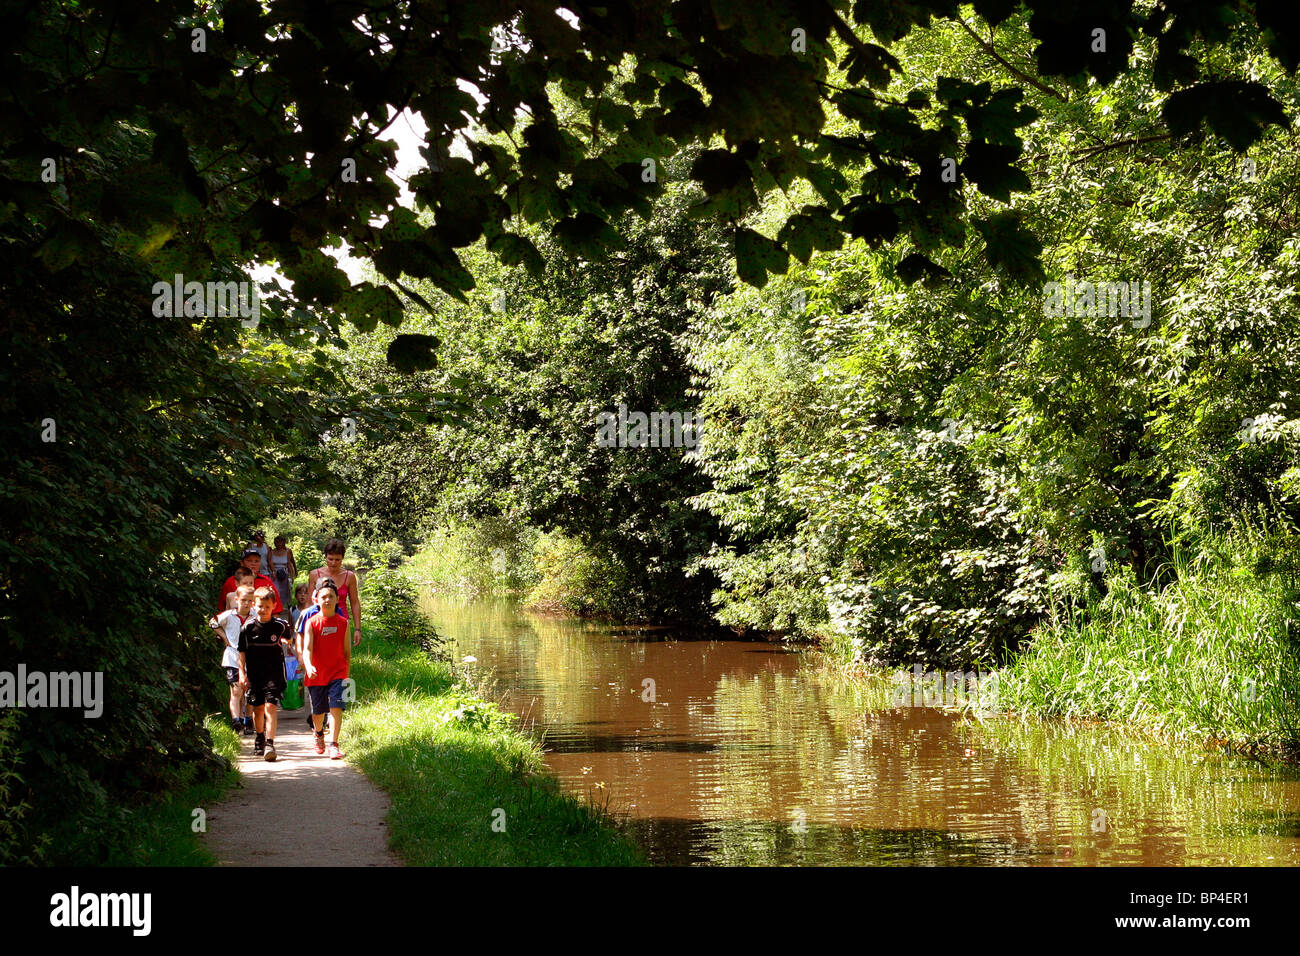 UK, England, Cheshire, Stockport, Romiley, Peak Forest Canal, children walking along towpath Stock Photo